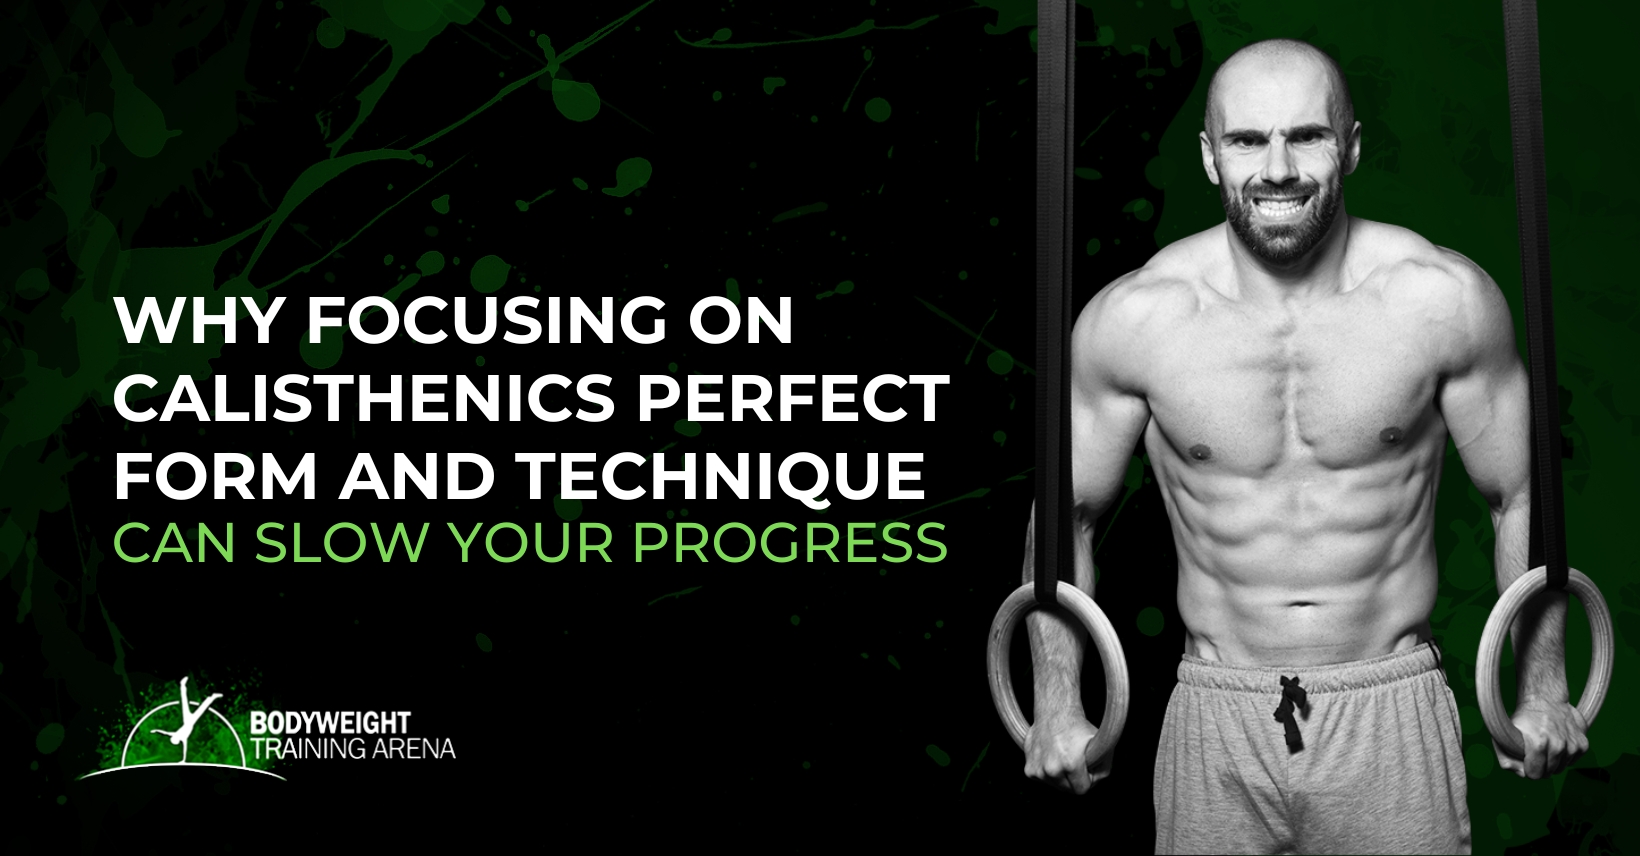 Why focusing on Calisthenics Perfect form and technique can SLOW your progress